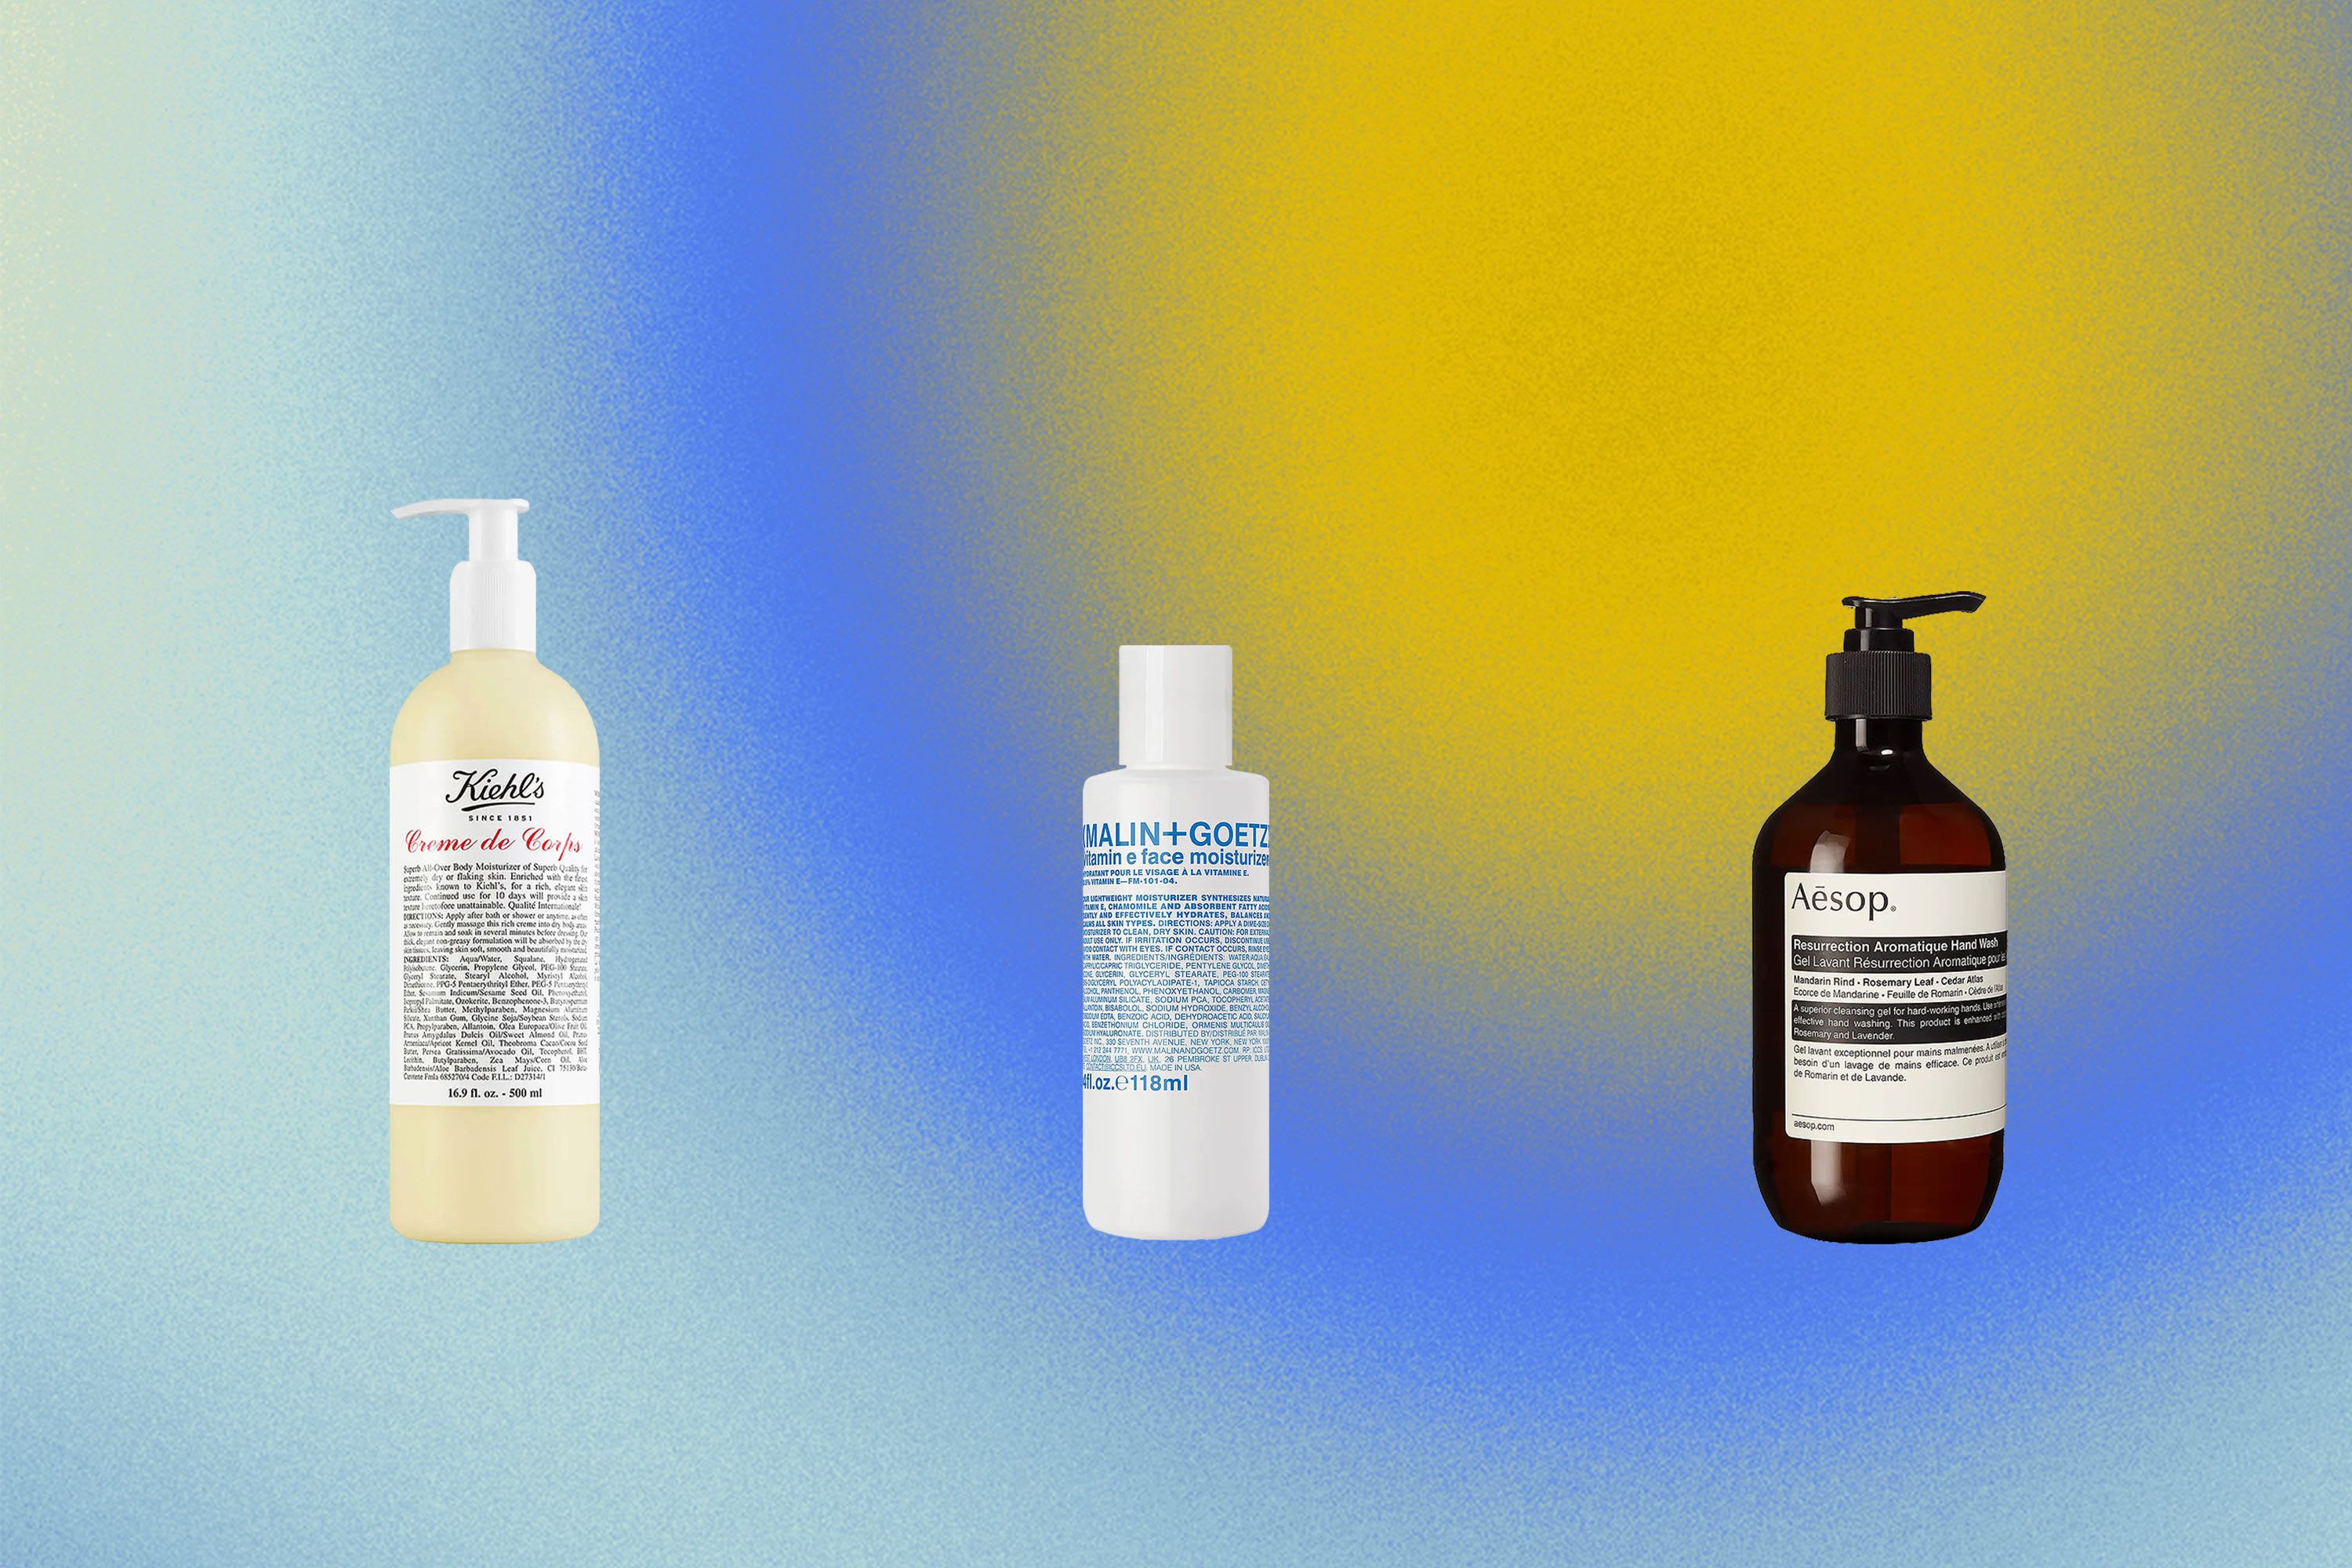 Your guide to the more expensive beauty products that are actually worth it